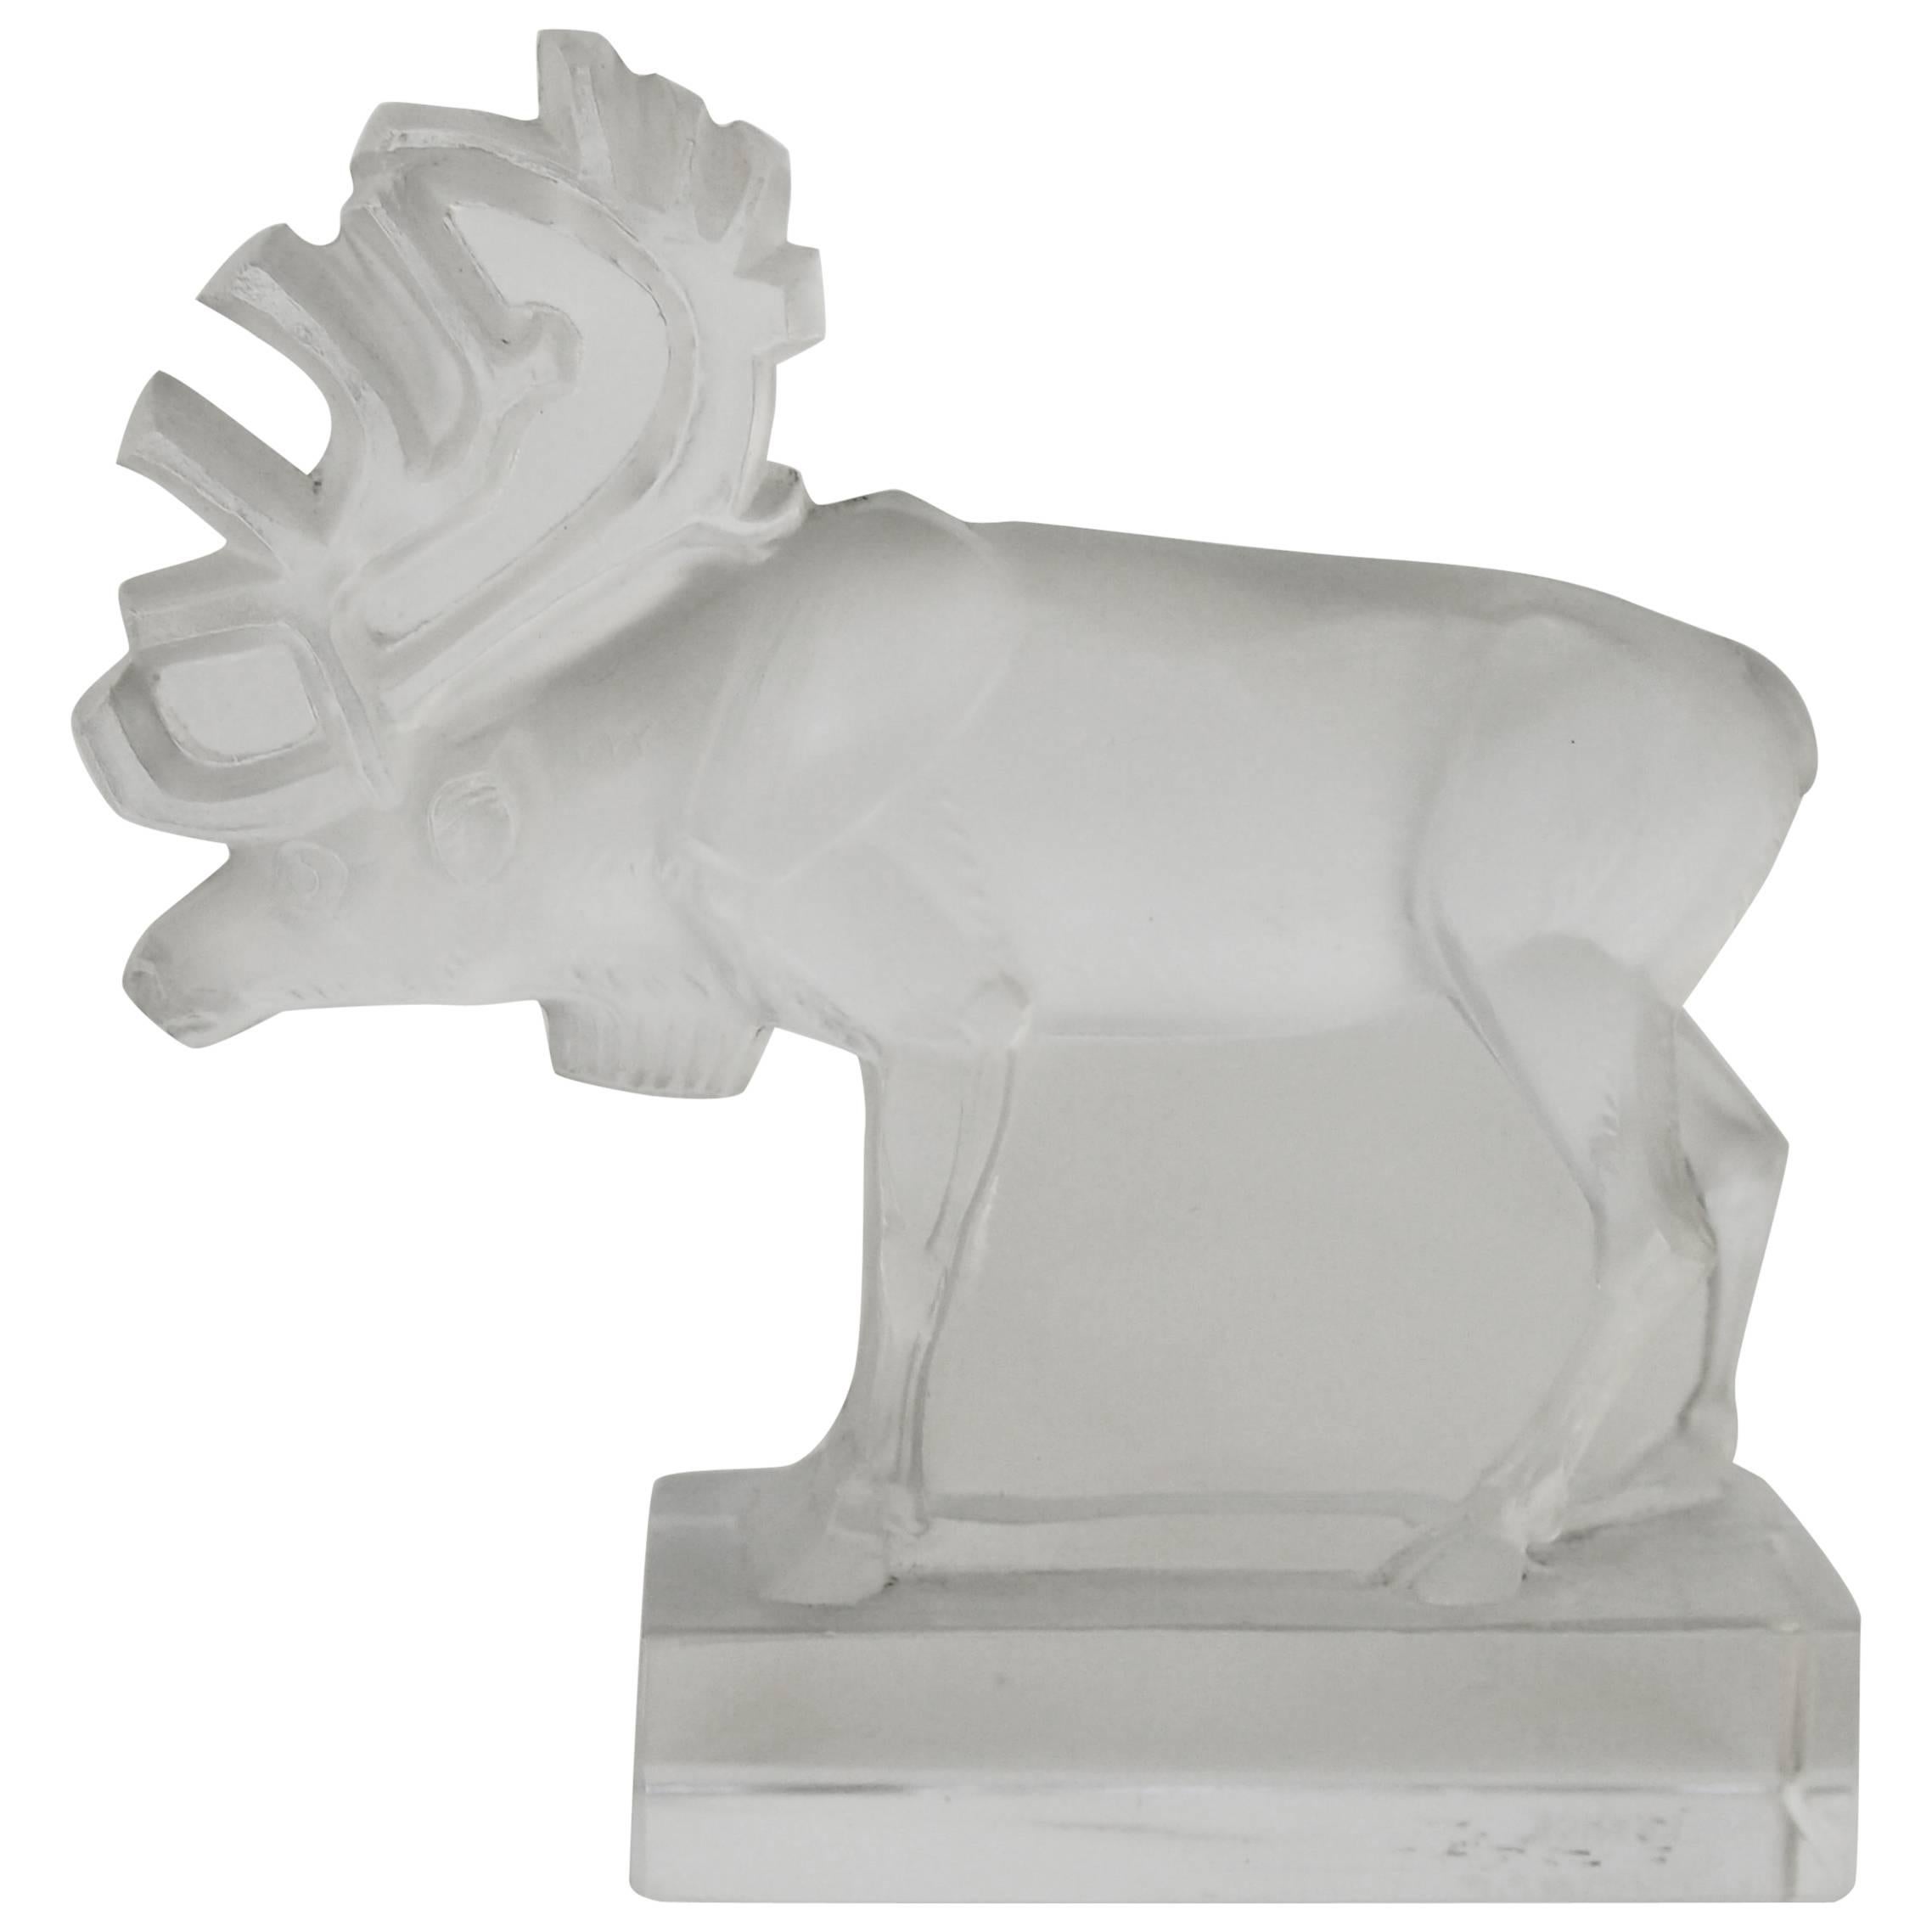 French Art Deco Rene Lalique Signed Renne 'Reindeer' Glass Paperweight 1930s For Sale